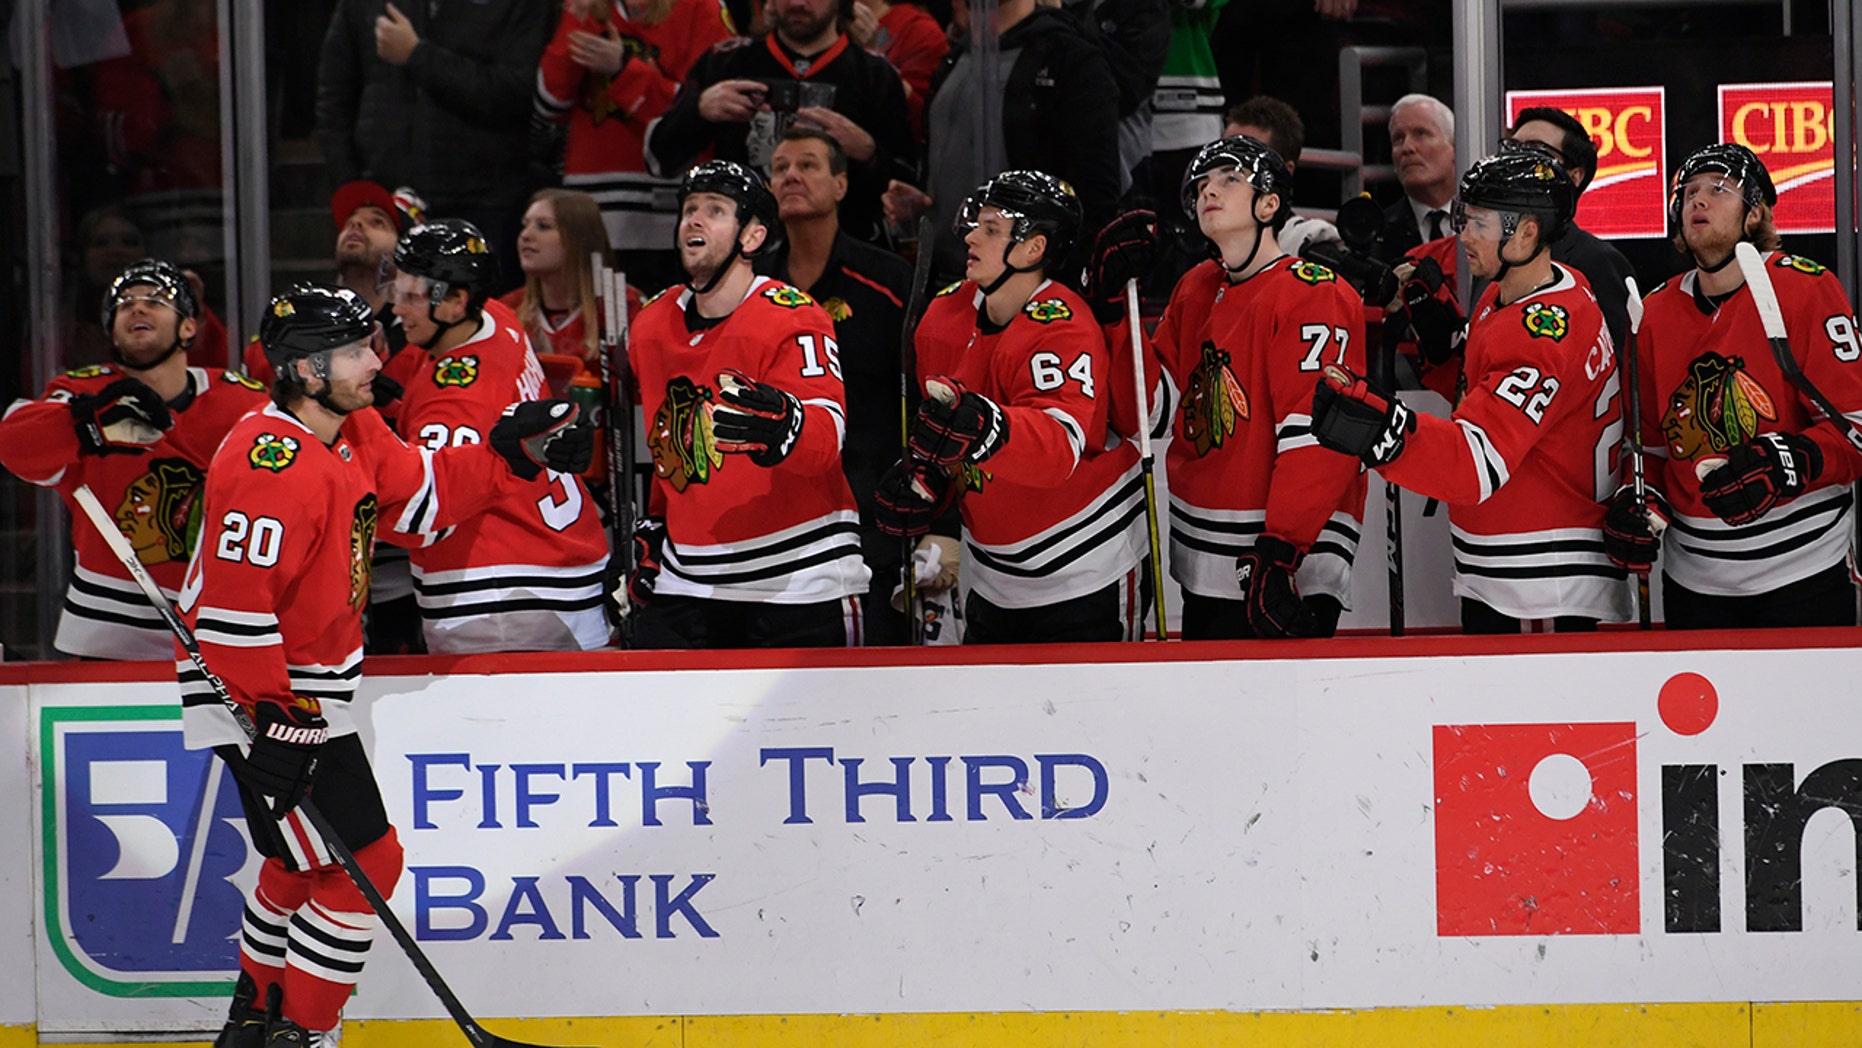 Chicago Blackhawks' Brandon Saad (20) celebrates with teammates on the bench after scoring a goal during the third period of an NHL hockey game against the Minnesota Wild, Sunday, Dec. 15, 2019, in Chicago. AP Photo/Paul Beaty)